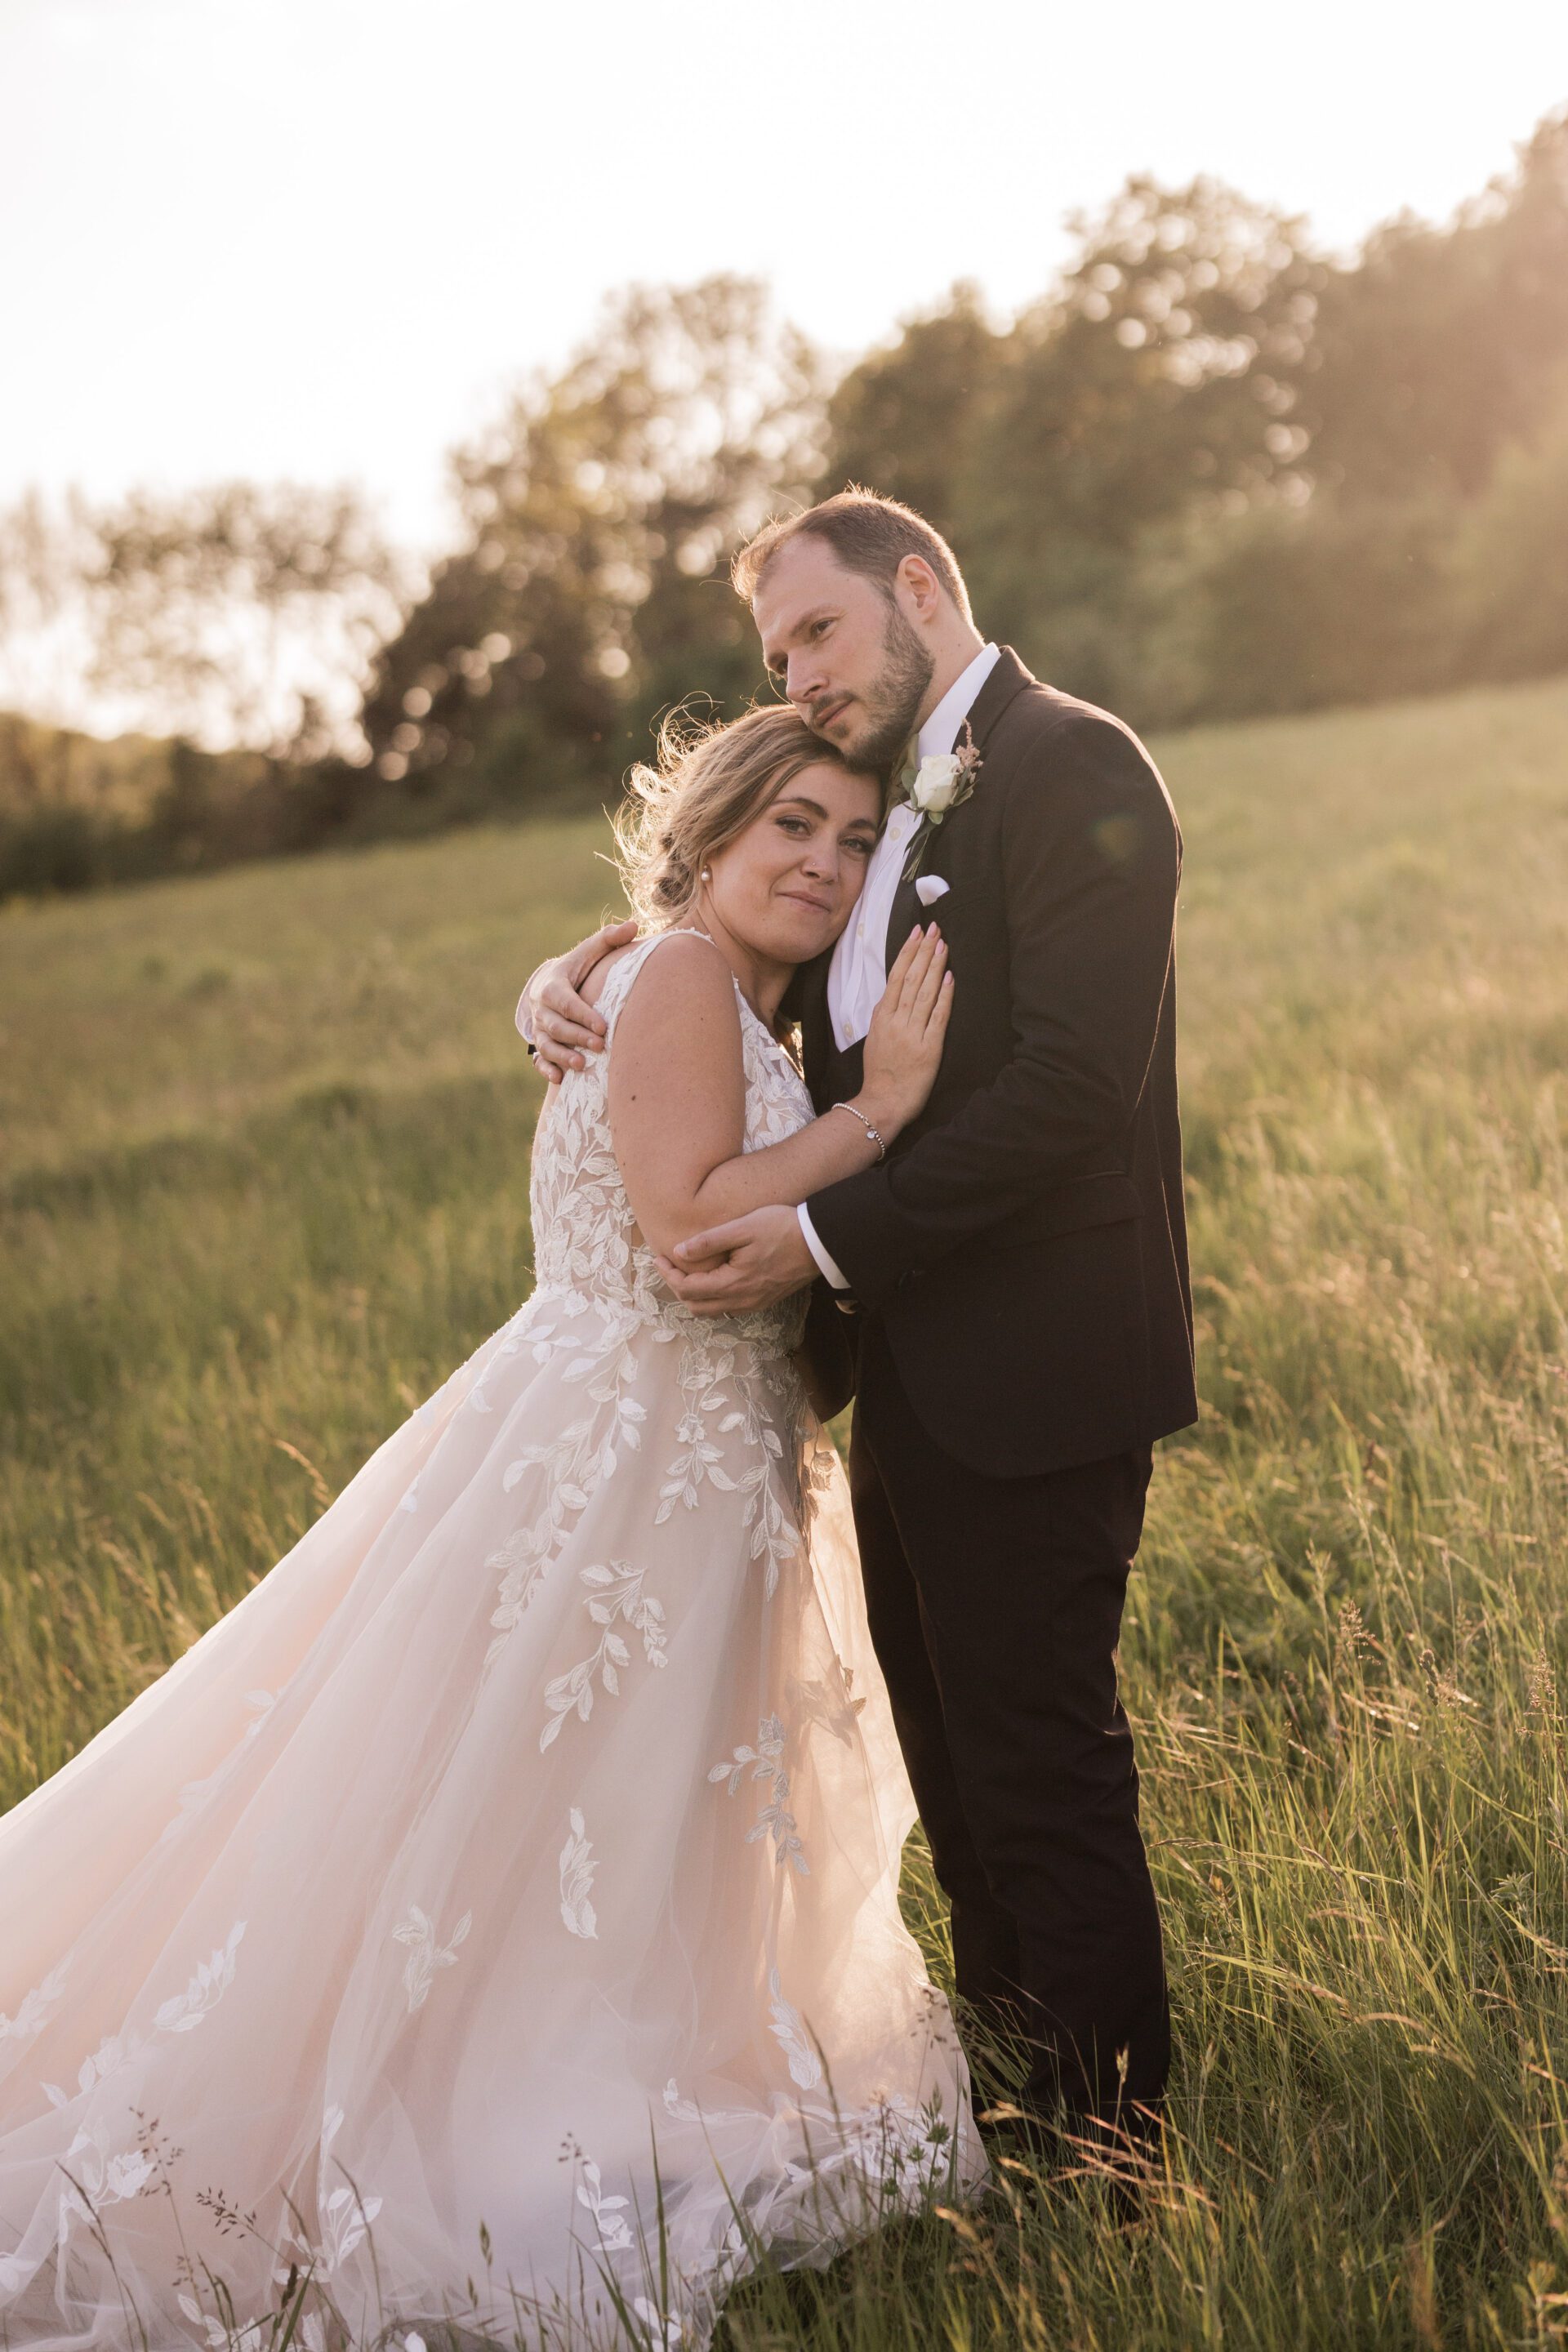 The bride and groom embrace during their couples portraits at golden hour